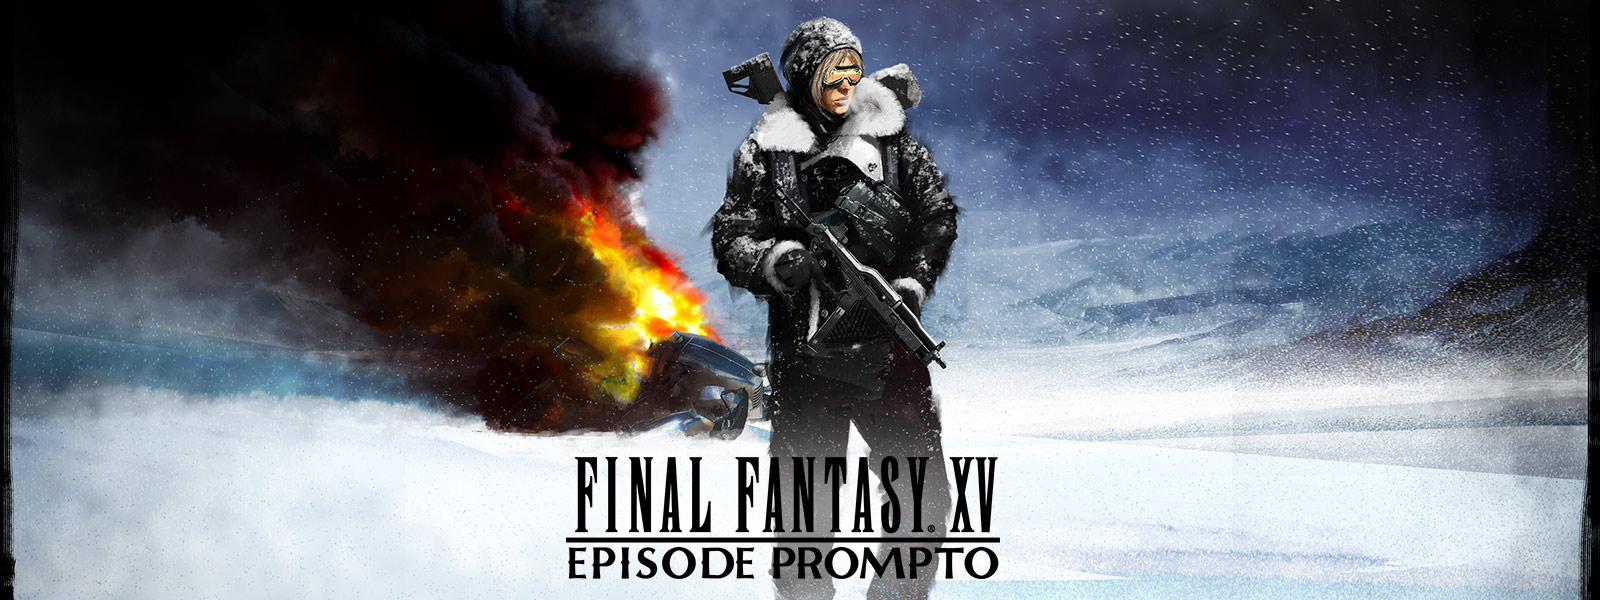 Download Film Final Fantasy X Sub Indonesia - skieymiracle